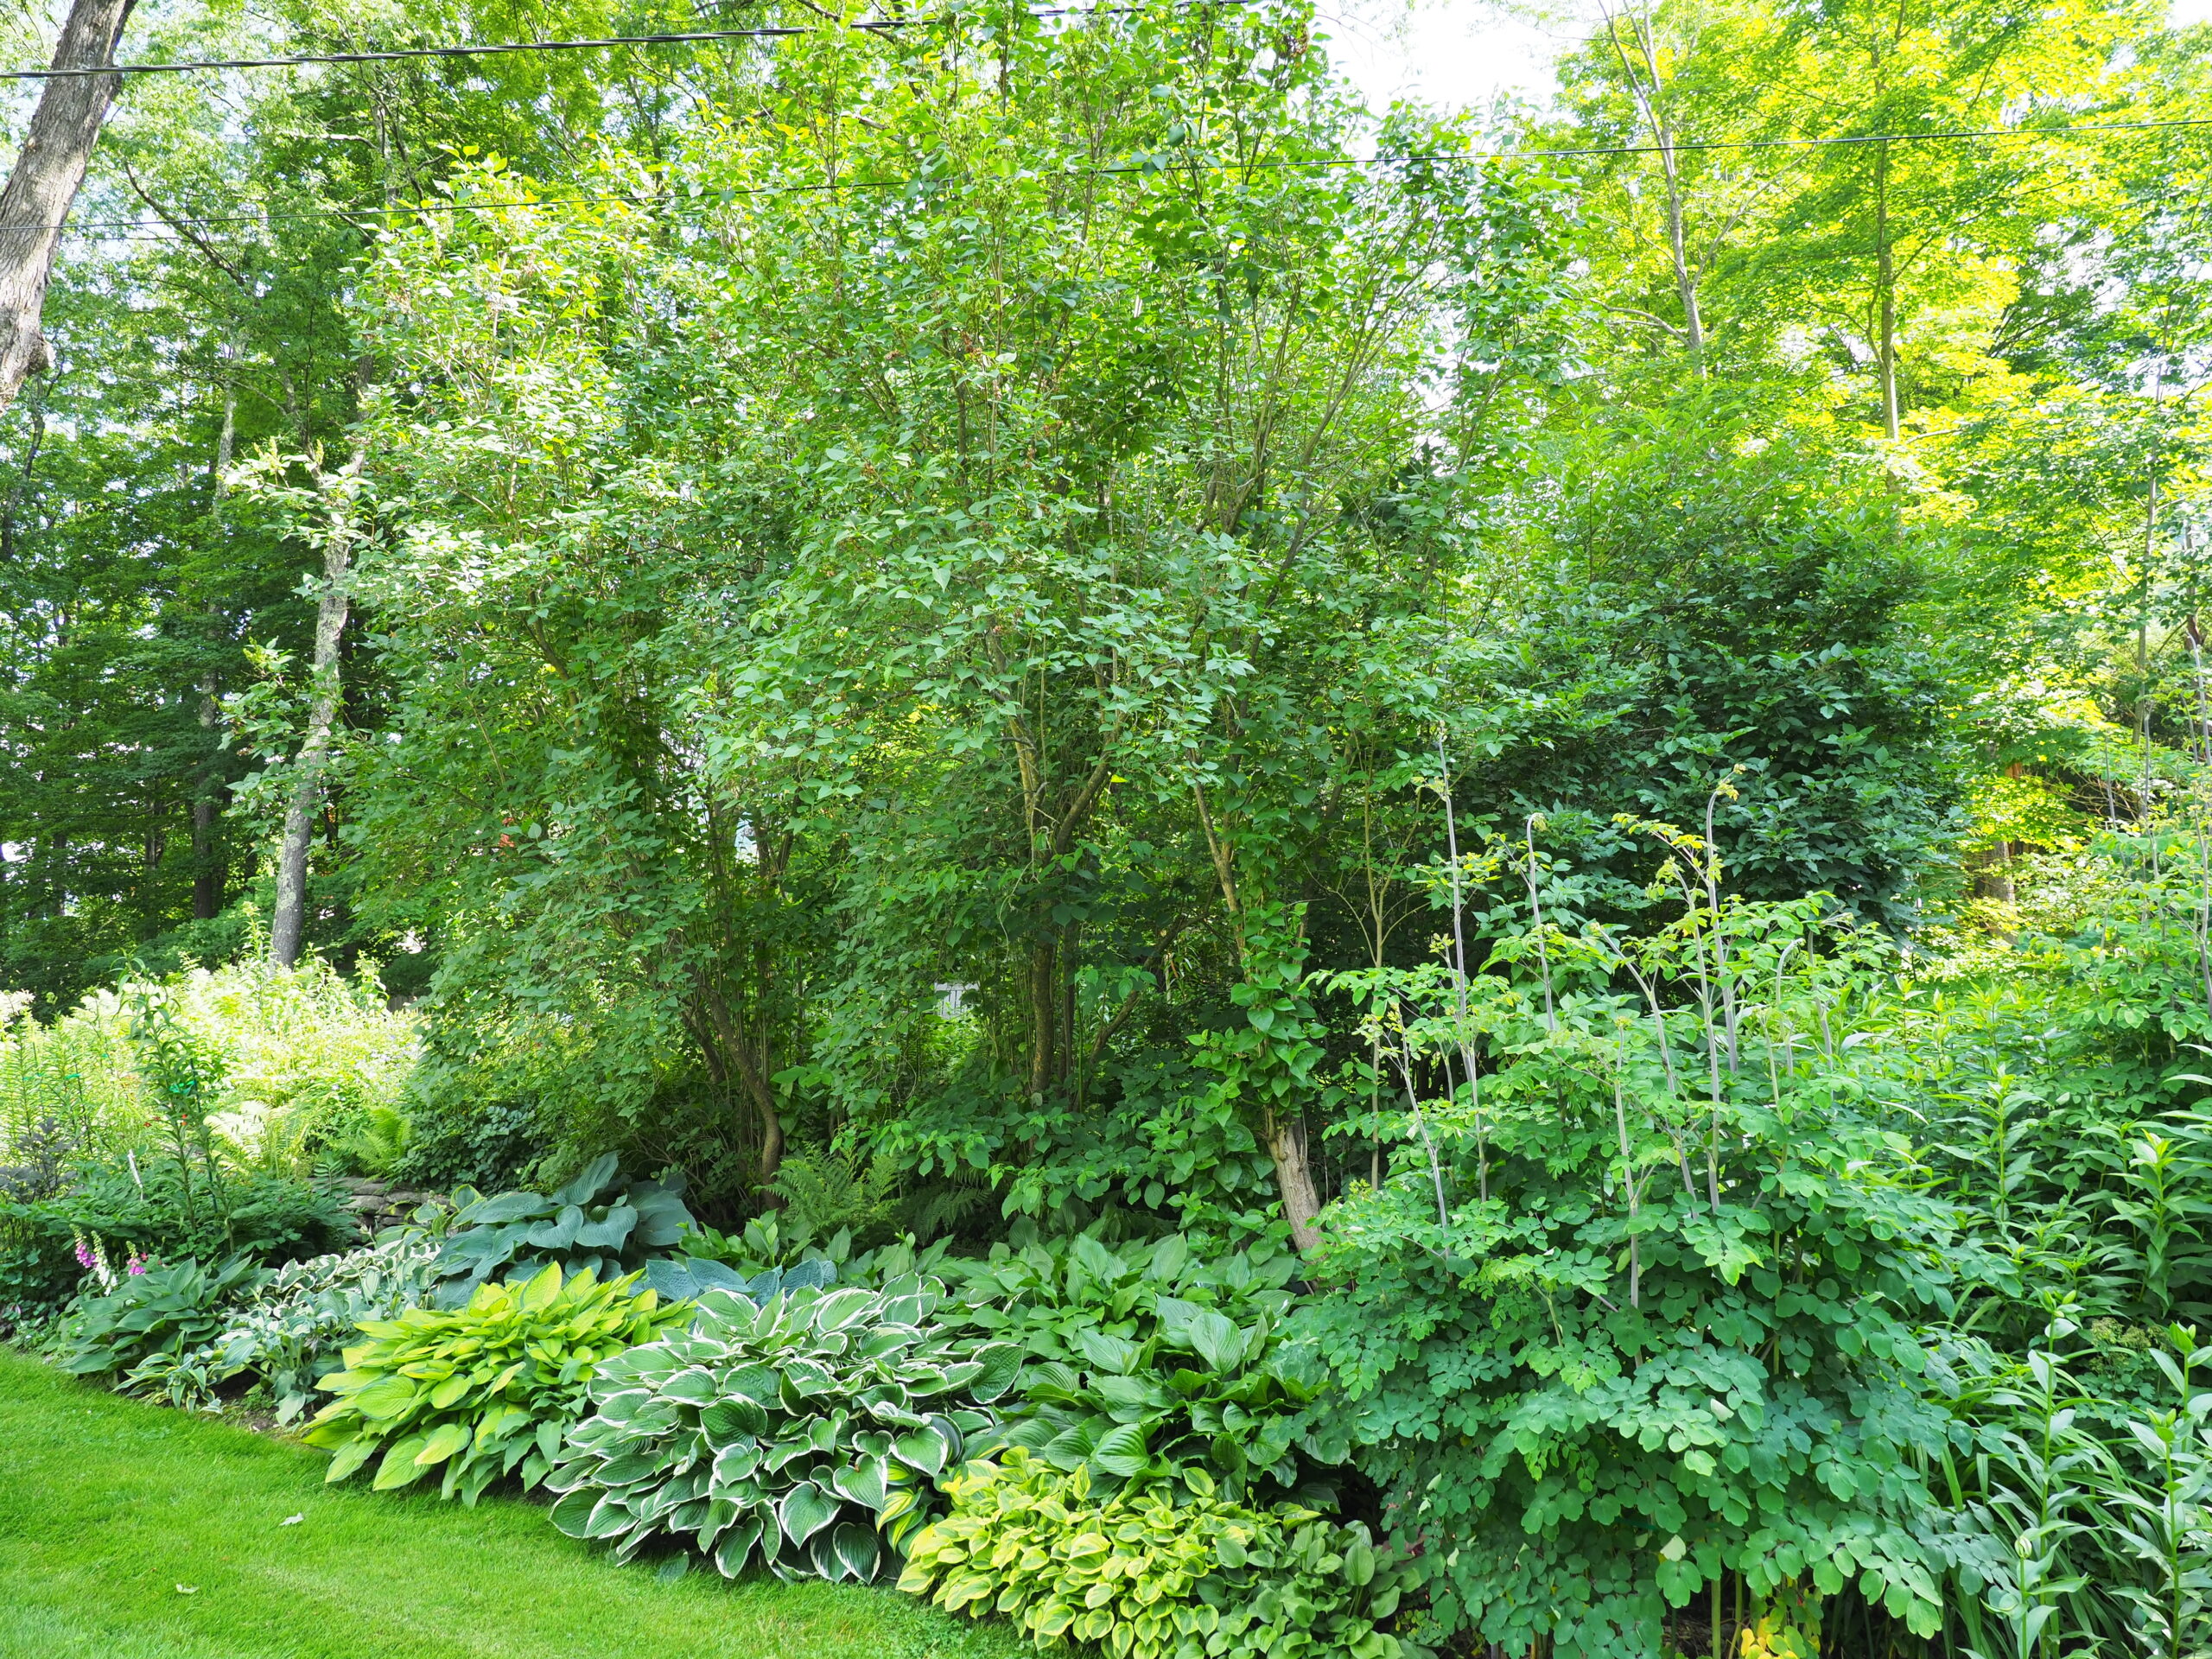 Most hostas are shade tolerant with most burning up in direct sunlight. Here the lilacs have been allowed to grow to 20 feet tall and provide all-day shade to the hostas in the border.  Again, there is bright light, but the sun never reaches the hosta foliage.   ANDREW MESSINGER